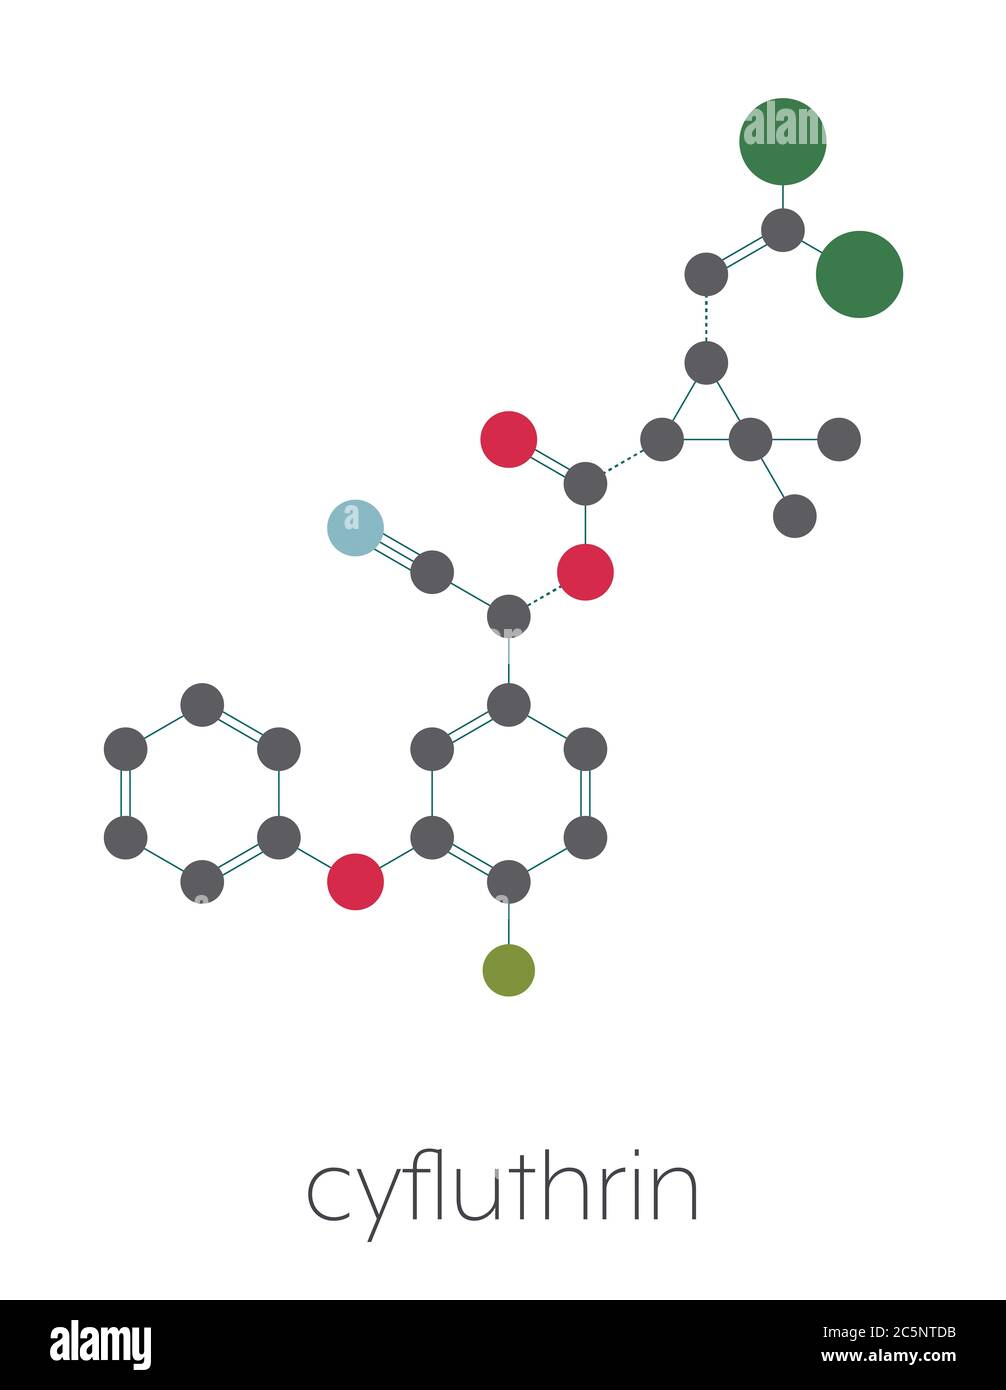 Cyfluthrin insecticide molecule. Stylized skeletal formula (chemical structure): Atoms are shown as color-coded circles: hydrogen (hidden), carbon (grey), oxygen (red), nitrogen (blue), chlorine (green), fluorine (cyan). Stock Photo